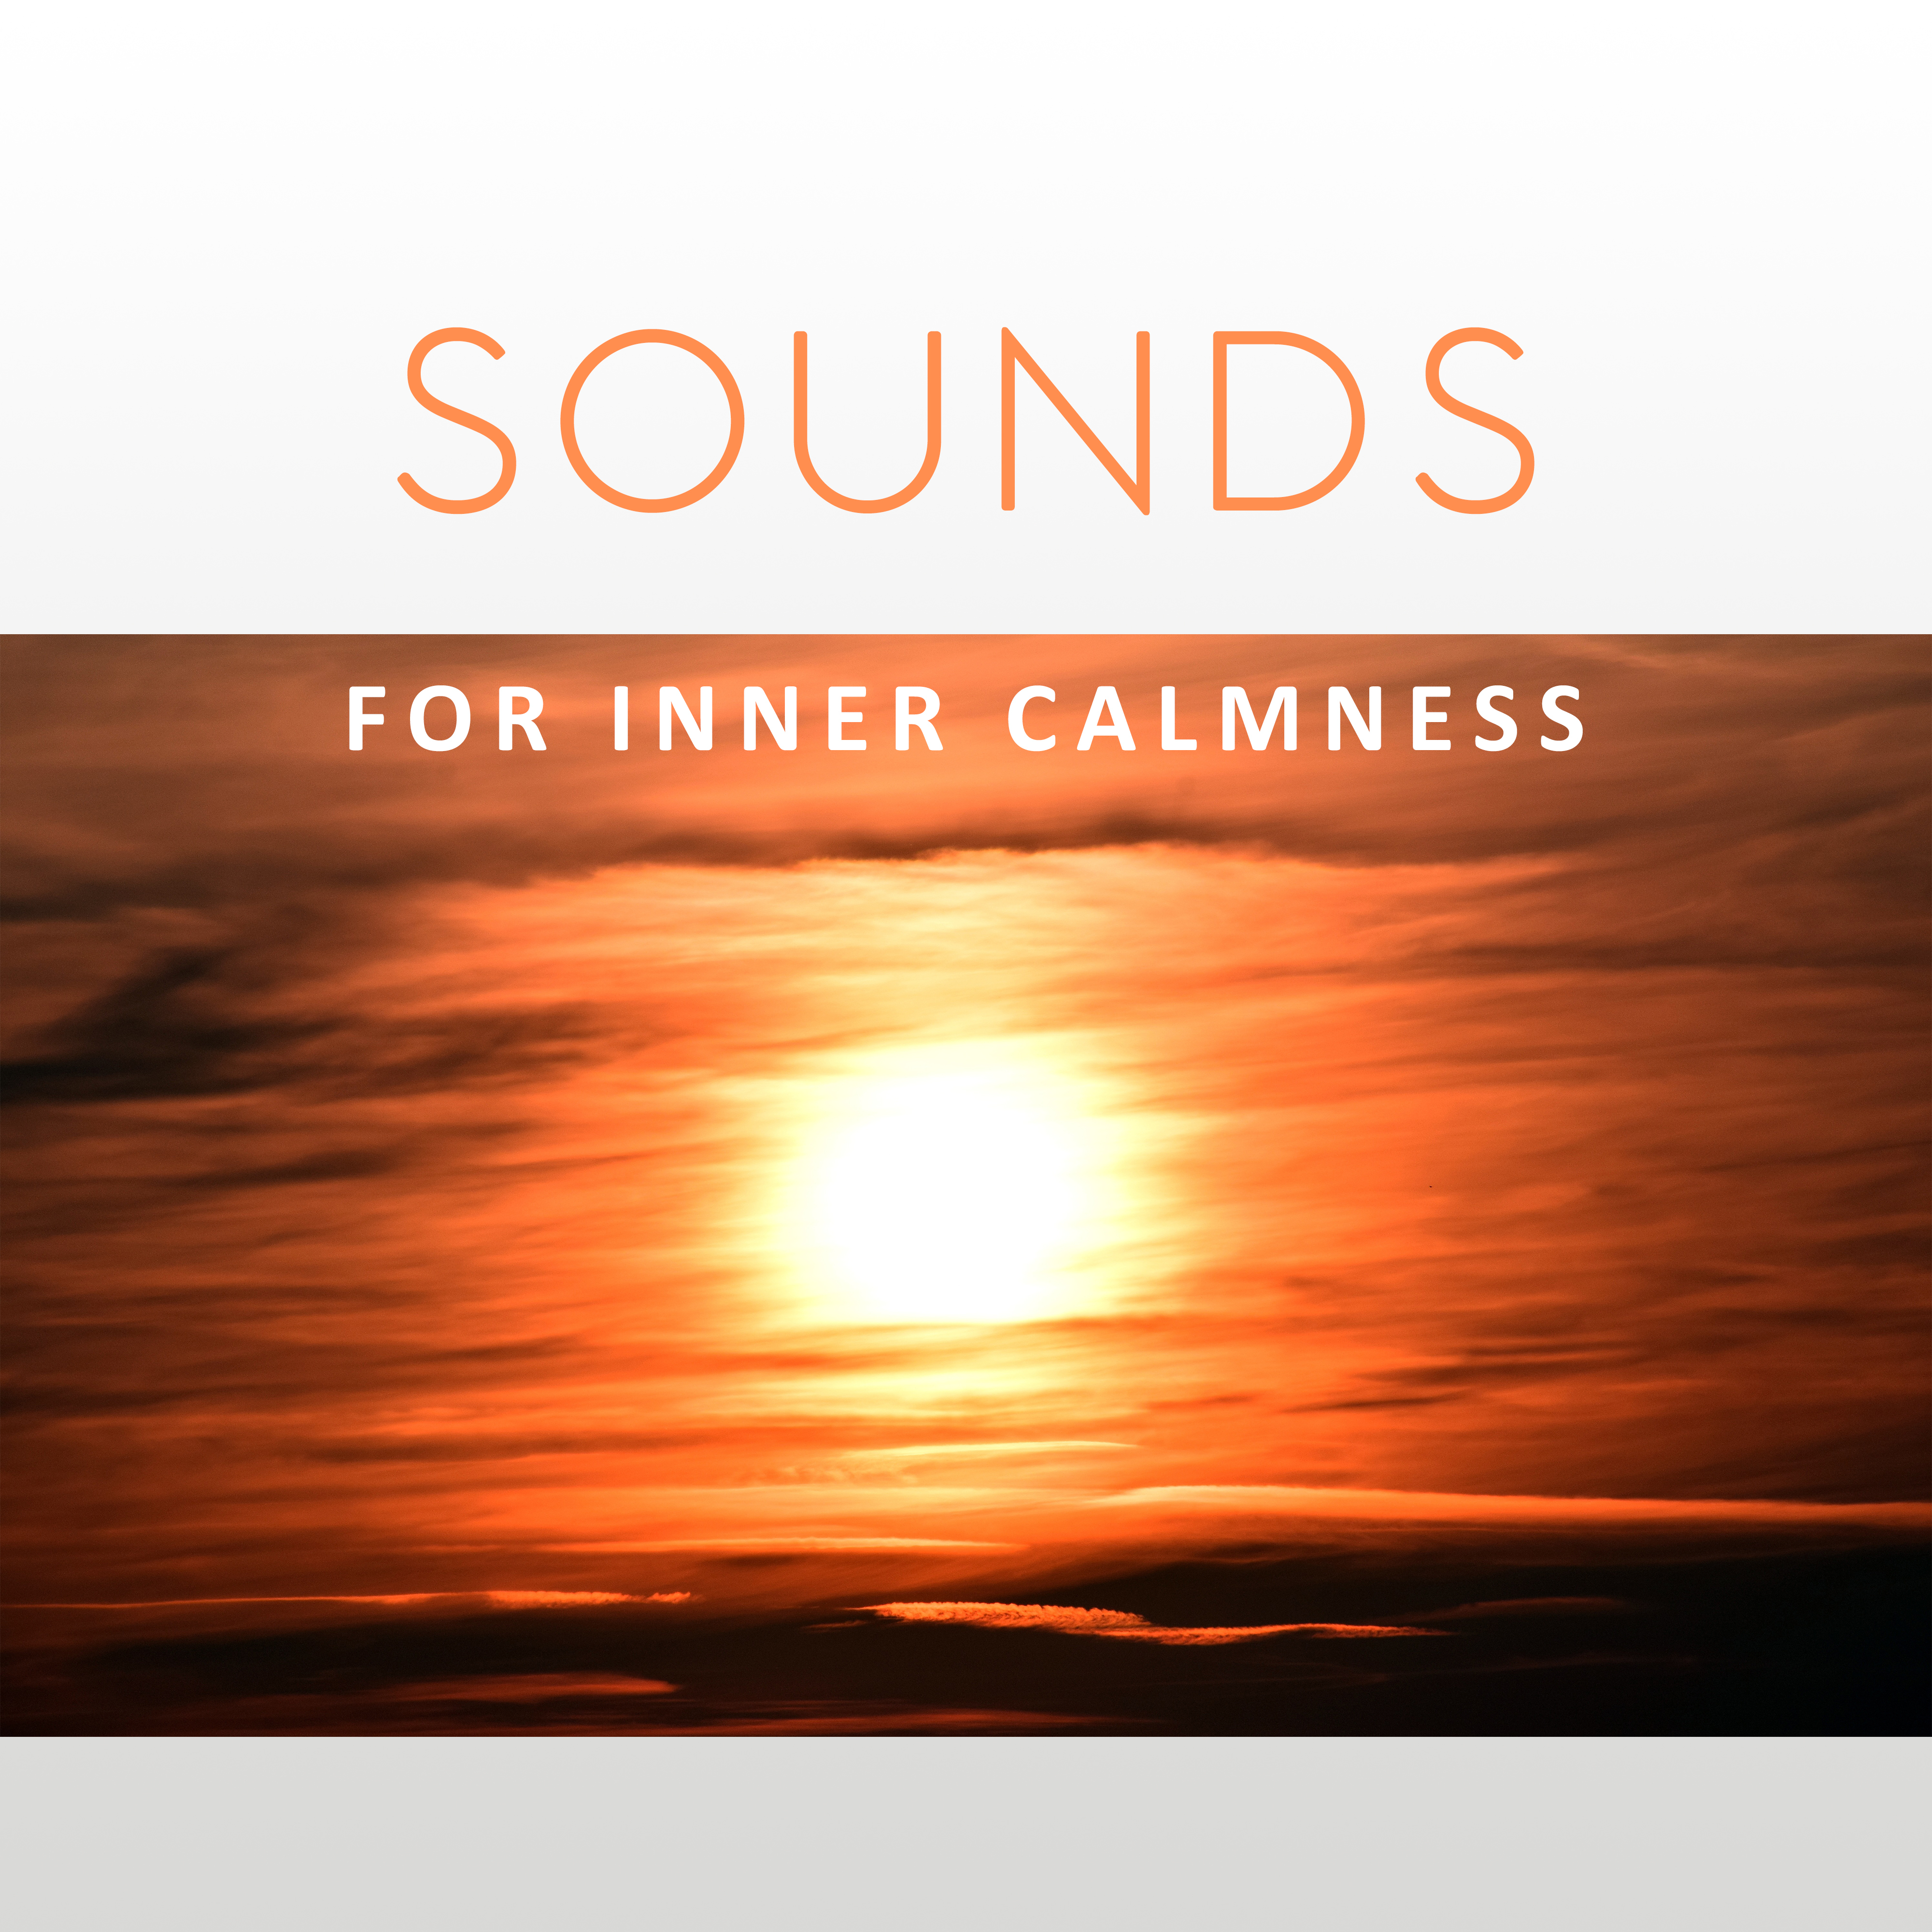 Sounds for Inner Calmness – Stress Relief, Peaceful Music, New Age Relaxation, Peaceful Night Waves